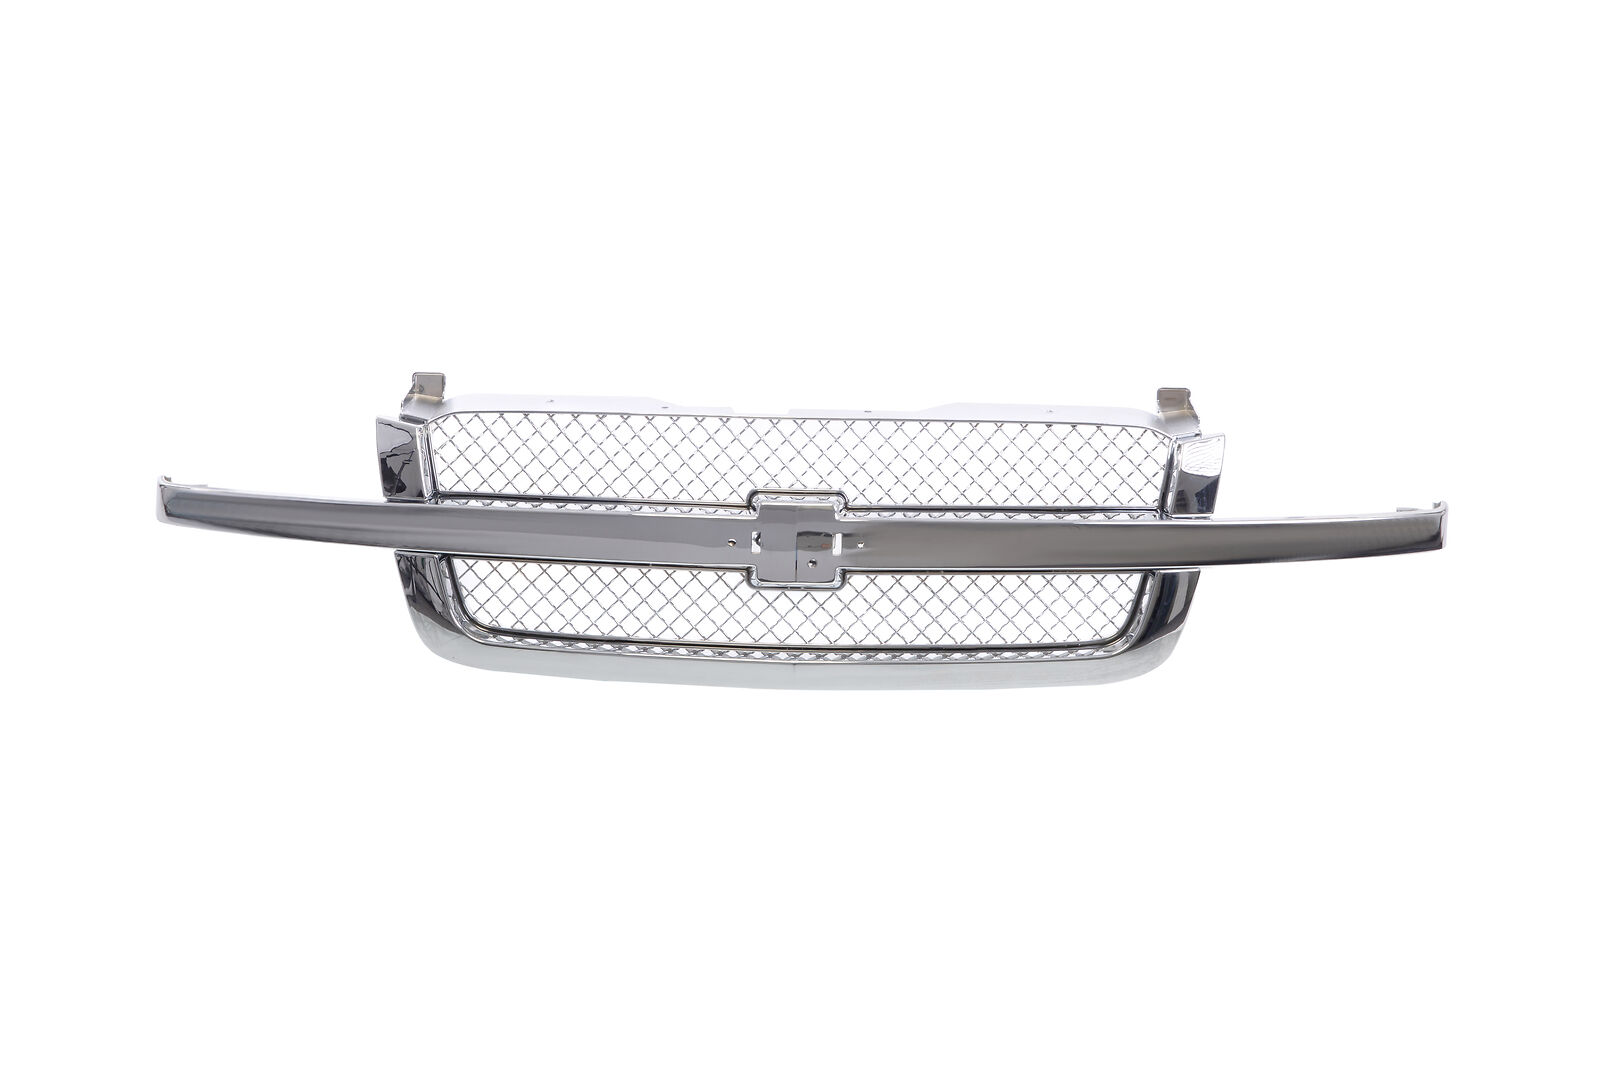 All Chrome Front Grille Grill Fit 03-06 Chevy Silverado Pick up Truck 1500 New